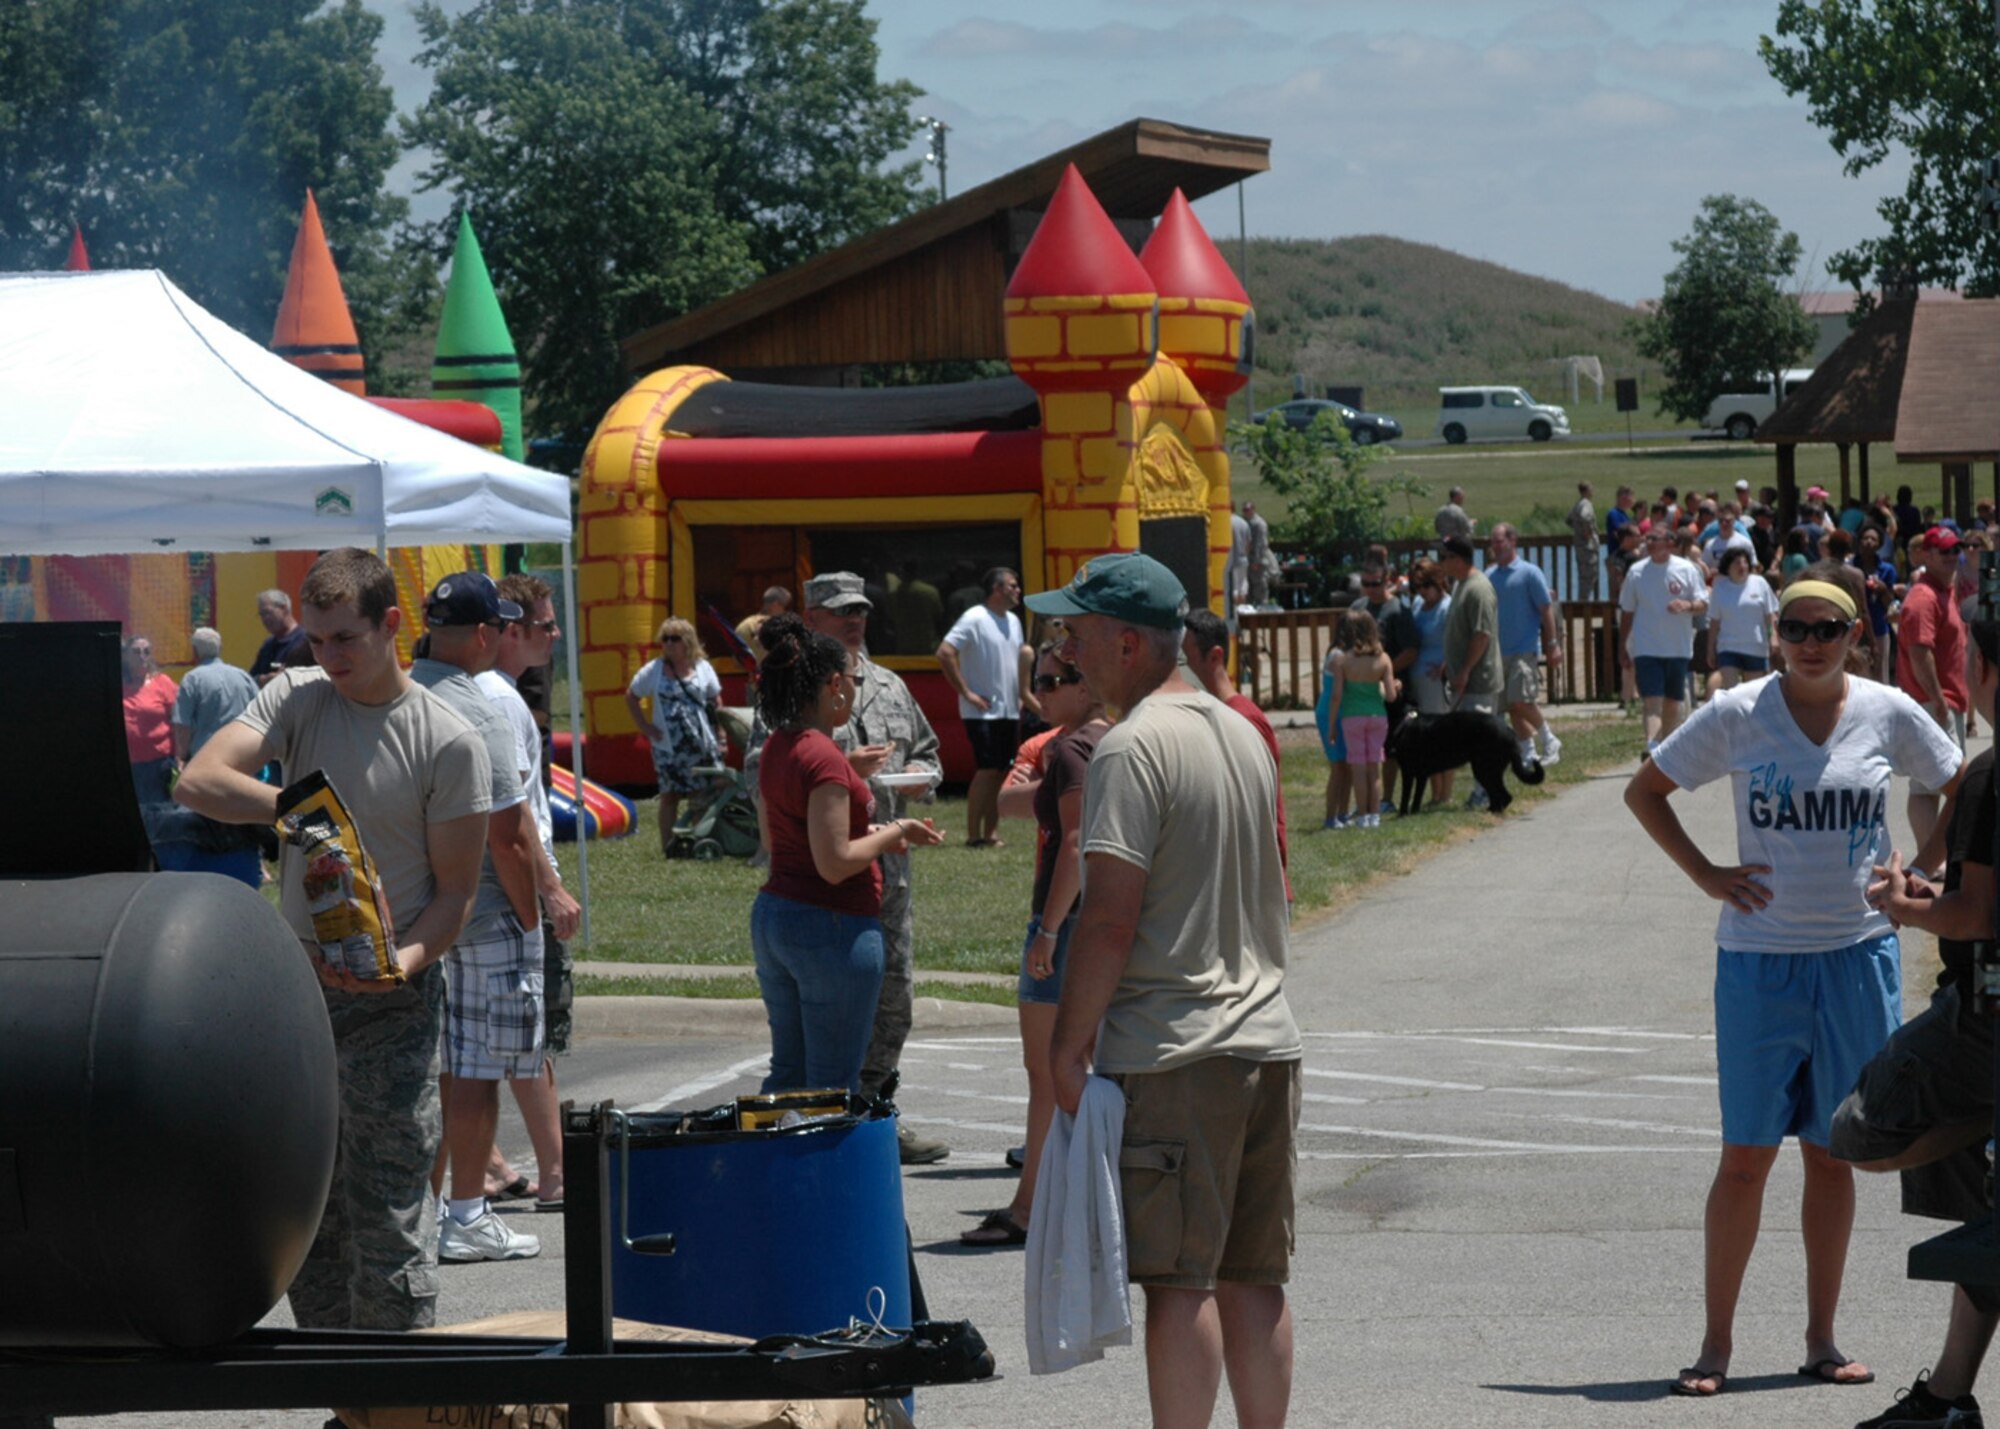 Current and retired members of the 131st Bomb Wing and their families
participate in Wing Family Day at Ike Skelton Park, Whiteman AFB, MO, June
11.  (Photo by Staff Sgt. Meiko Schill)
